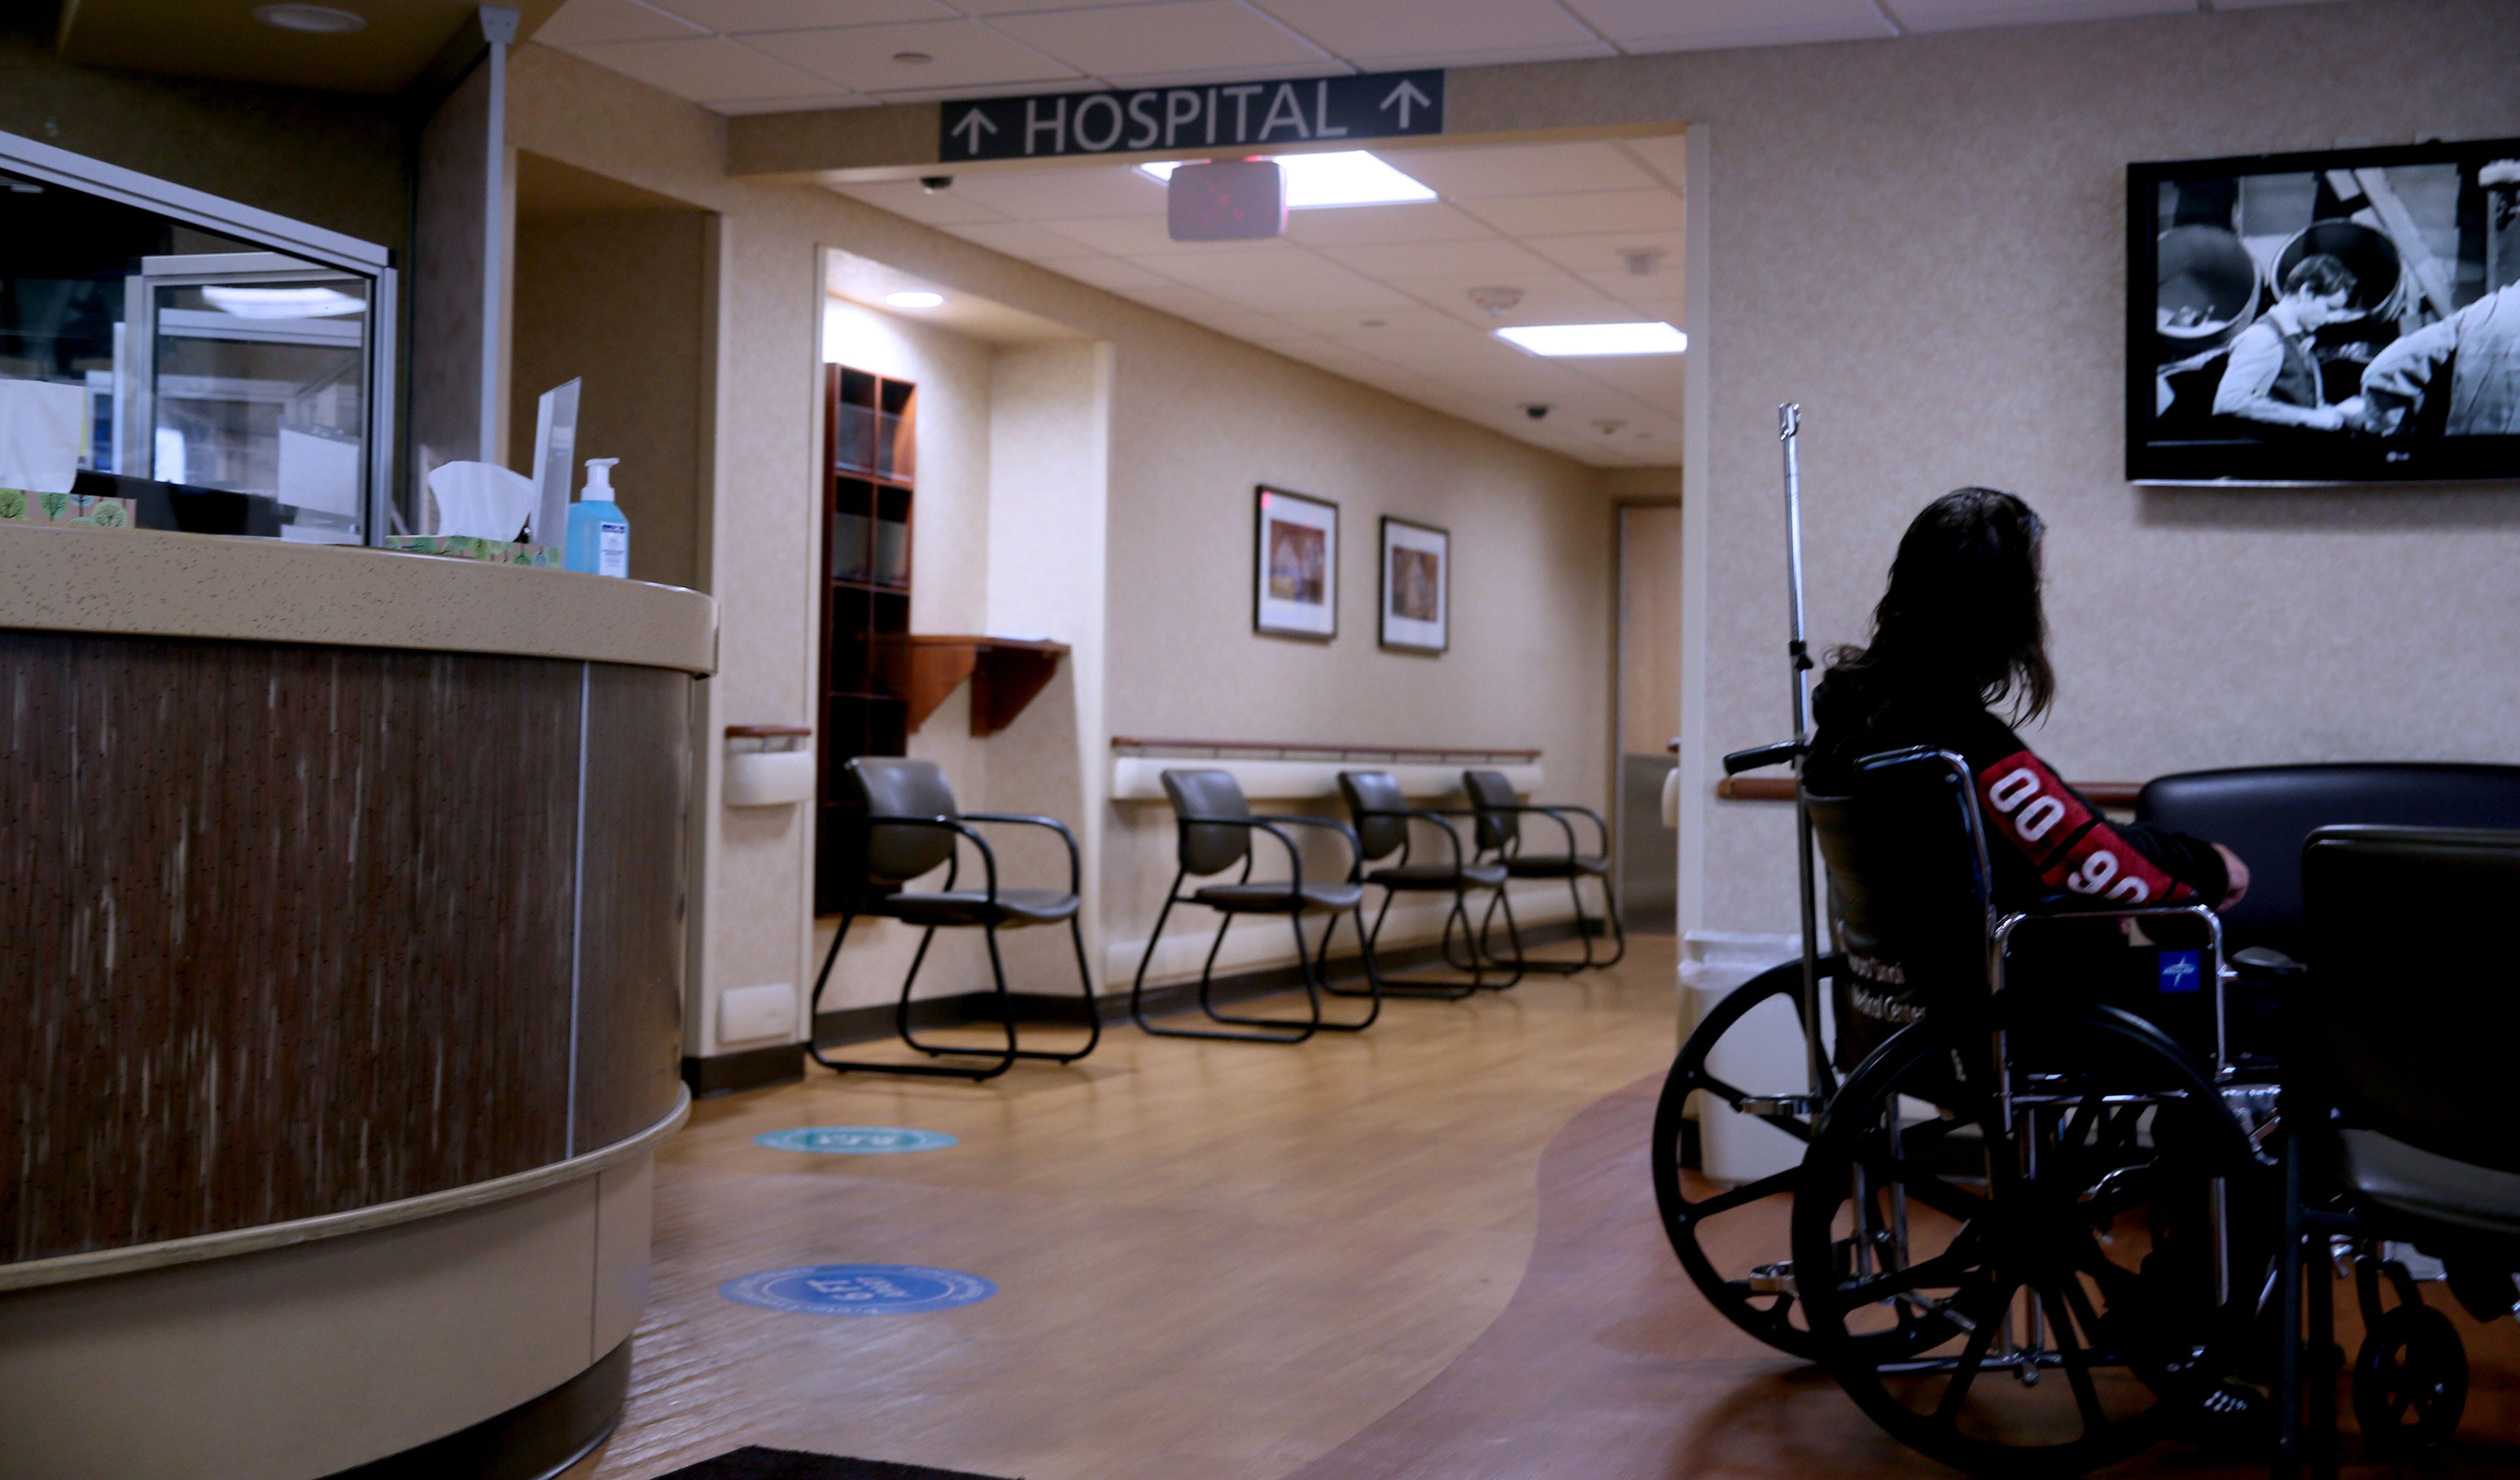 A patient waits in the emergency department of Ascension SE Wisconsin Hospital - St. Joseph Campus, Milwaukee. Poor people often use emergency departments for care, but never really improve their health.